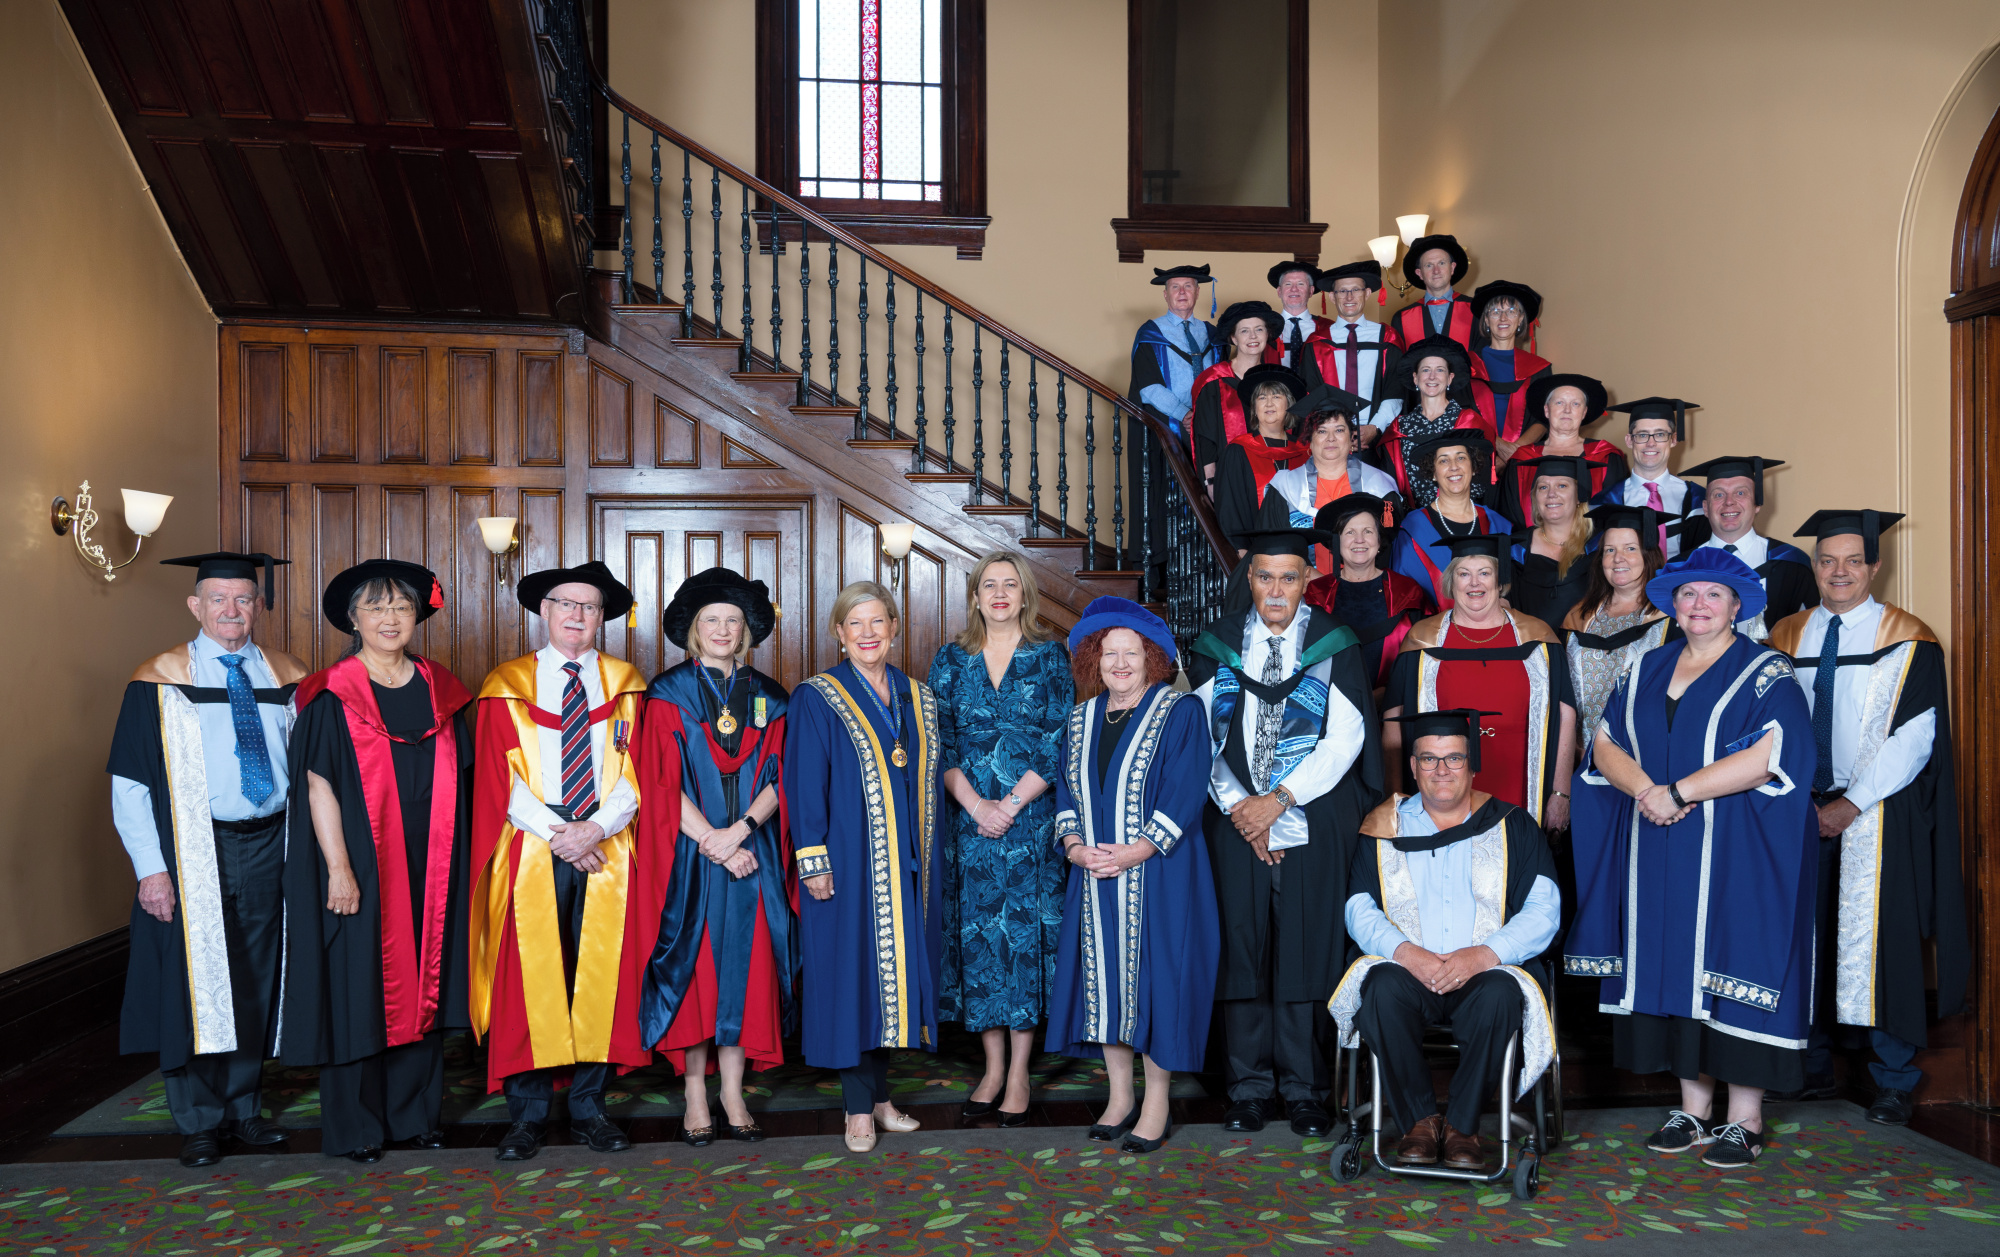 Academics in gowns stand in front of a staircase